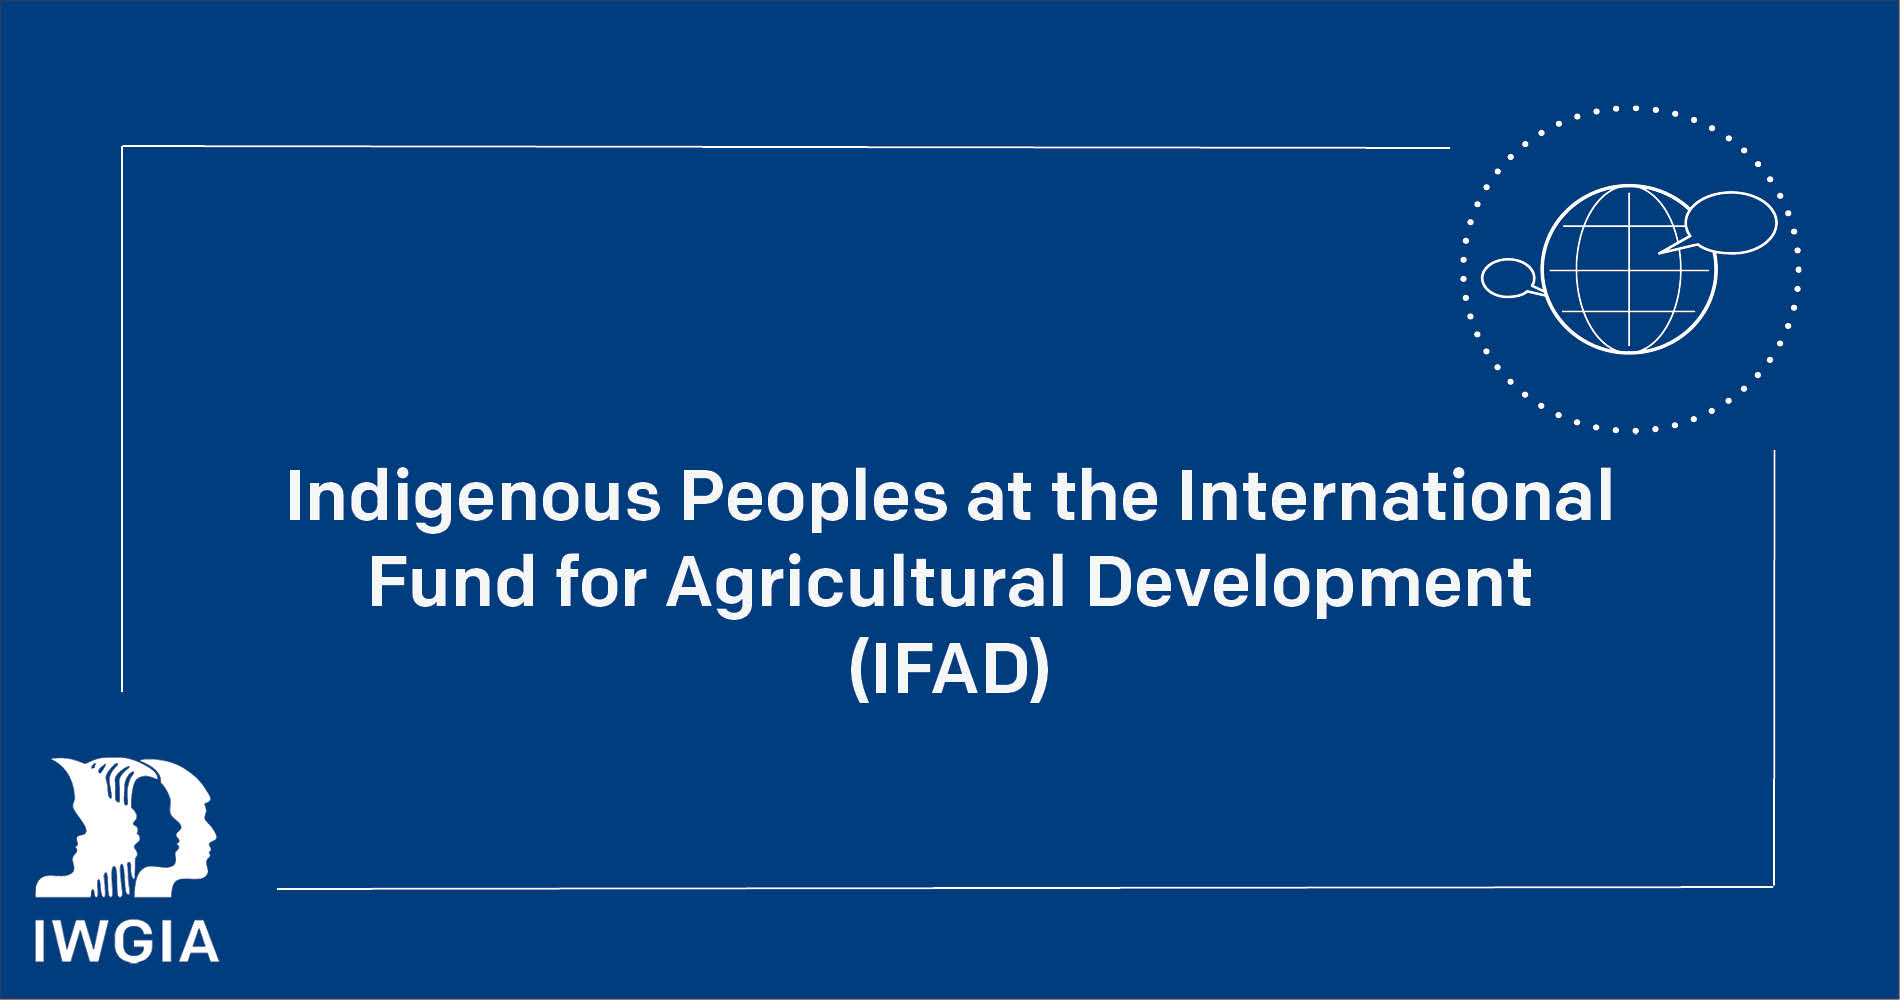 Indigenous Peoples at the International Fund for Agricultural Development (IFAD)